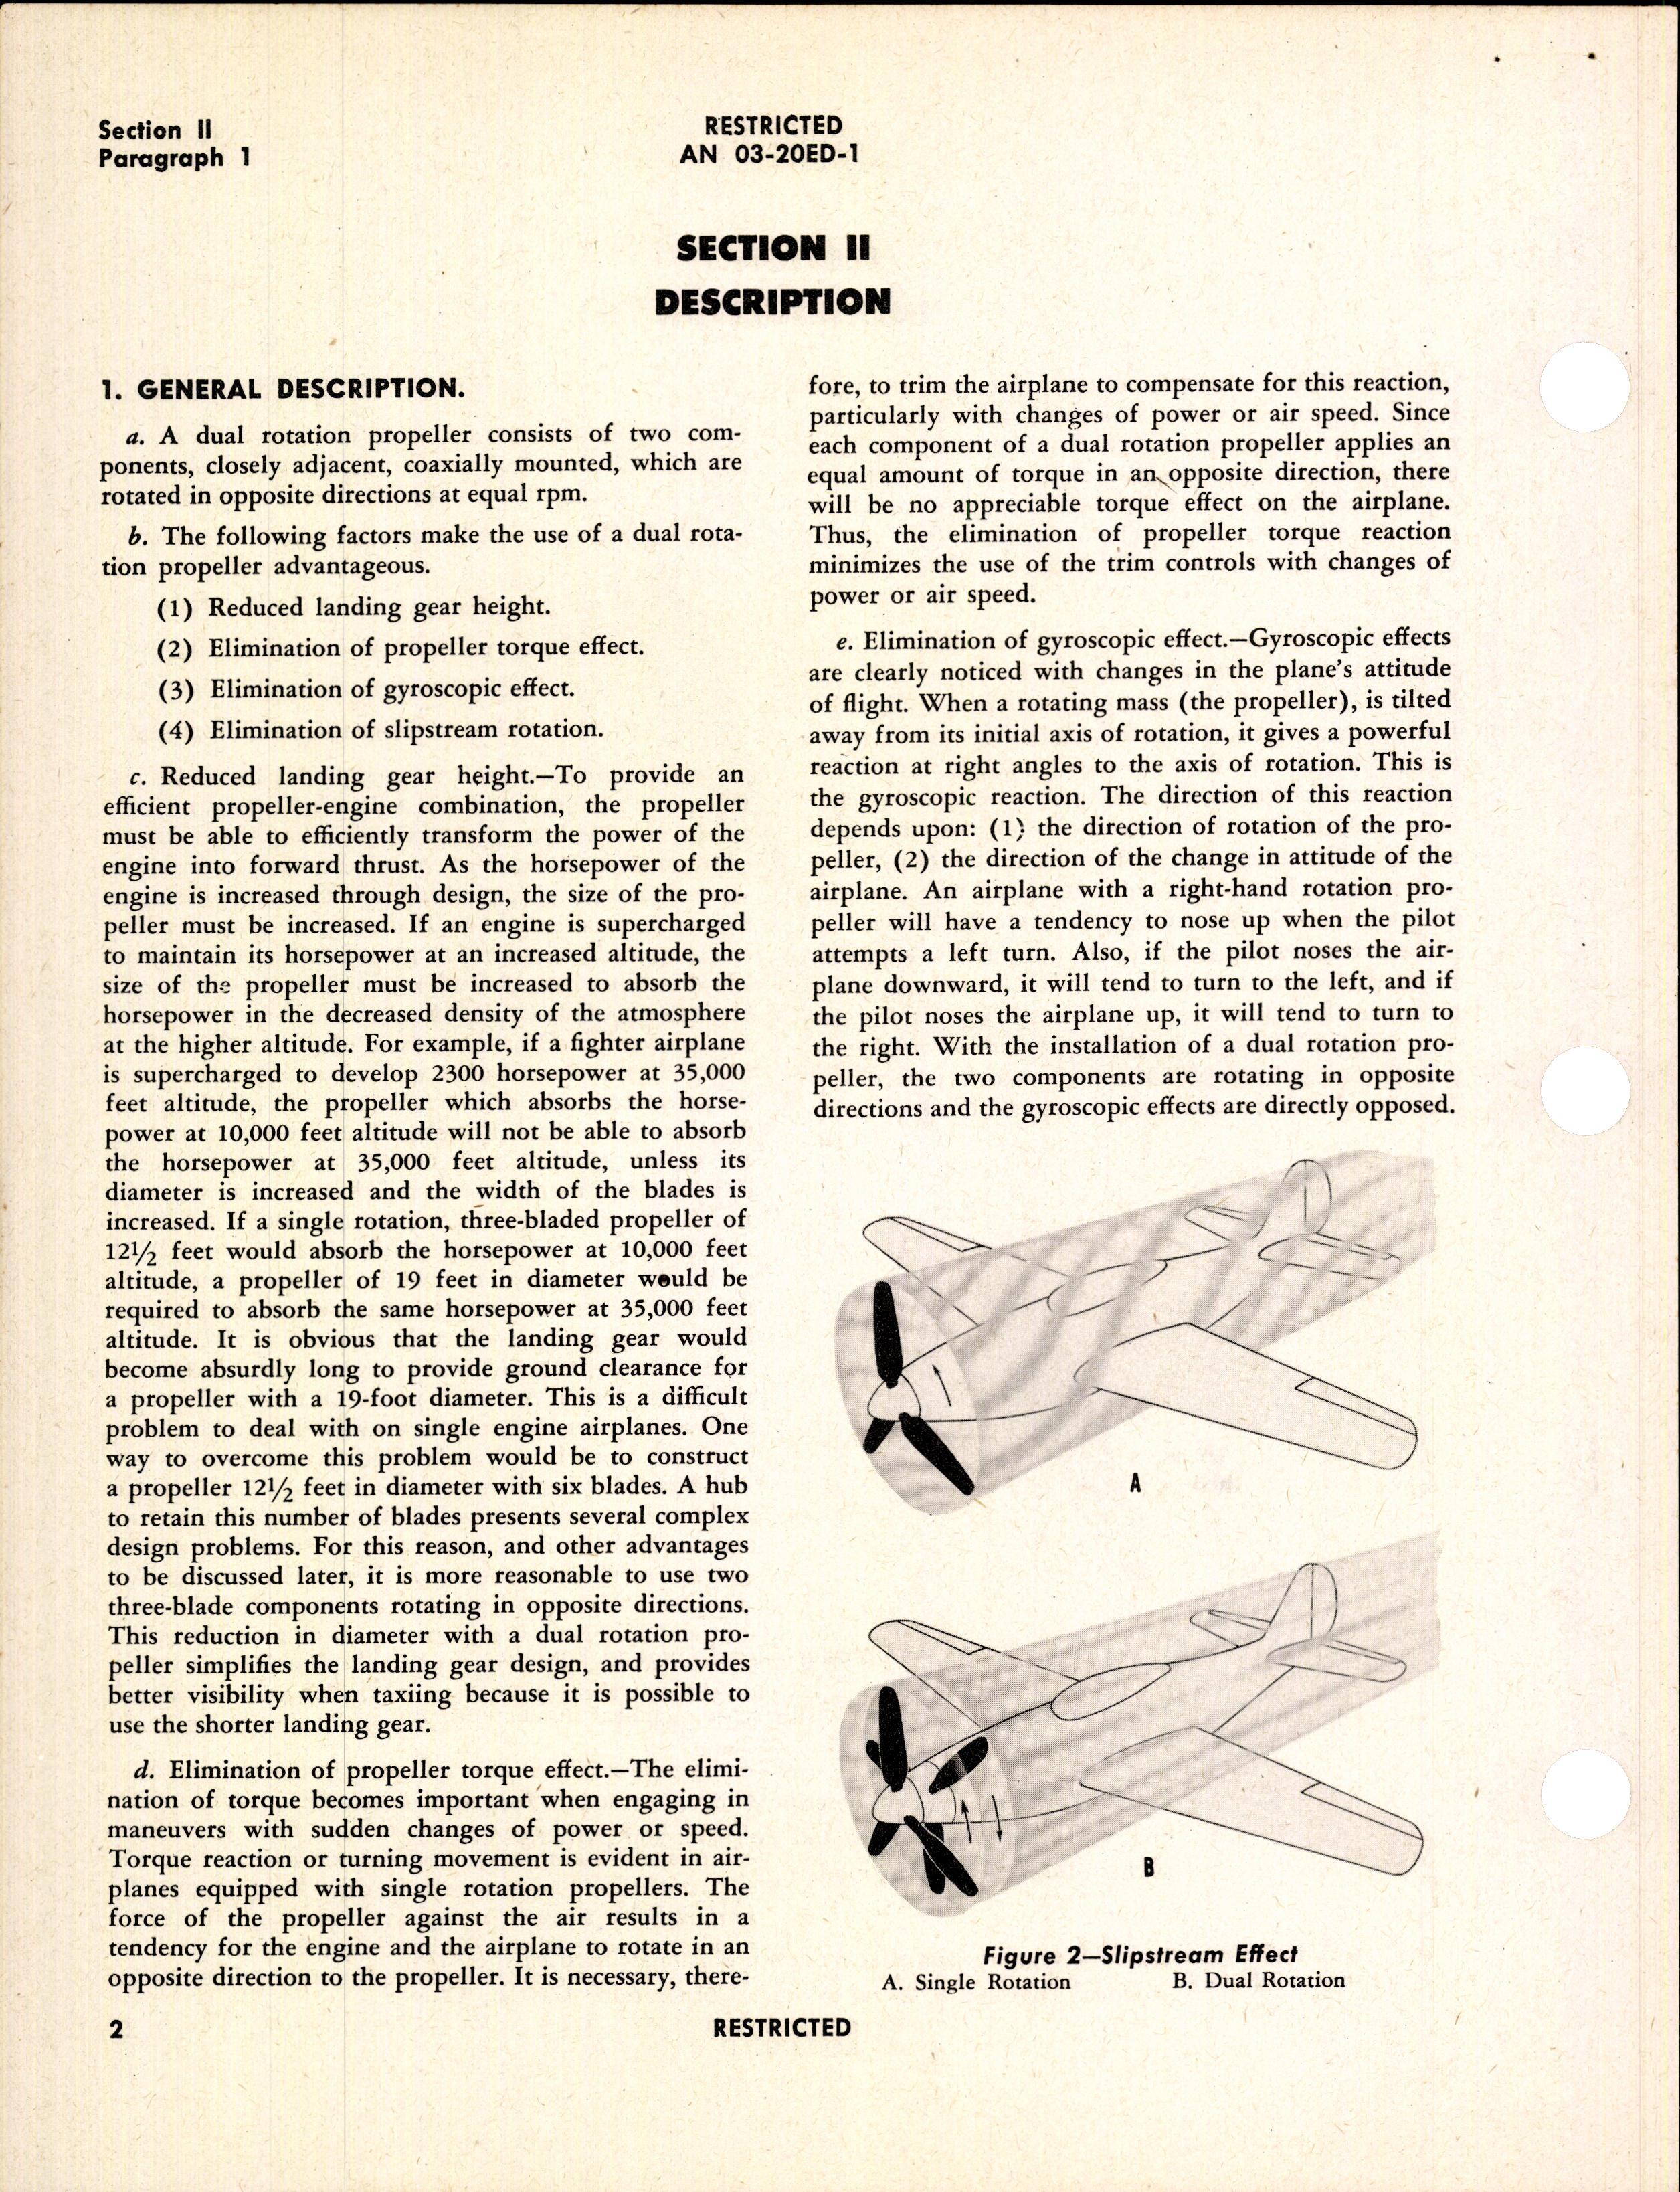 Sample page 6 from AirCorps Library document: Handbook of Instructions with Parts Catalog for Dual Rotation Propellers